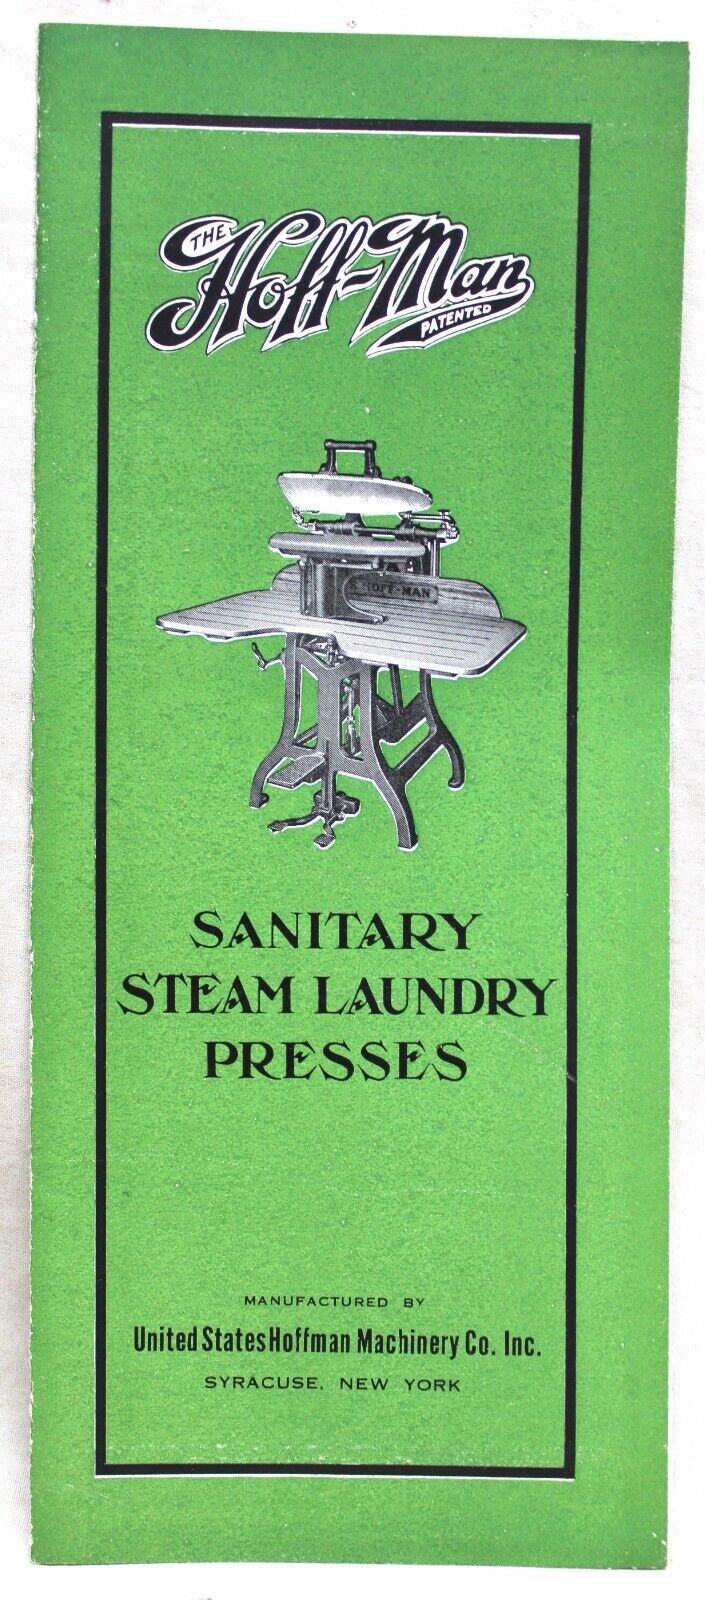 HOFFMAN SANITARY STEAM LAUNDRY PRESS MACHINES ADVERTISING BROCHURE ABOUT 1920